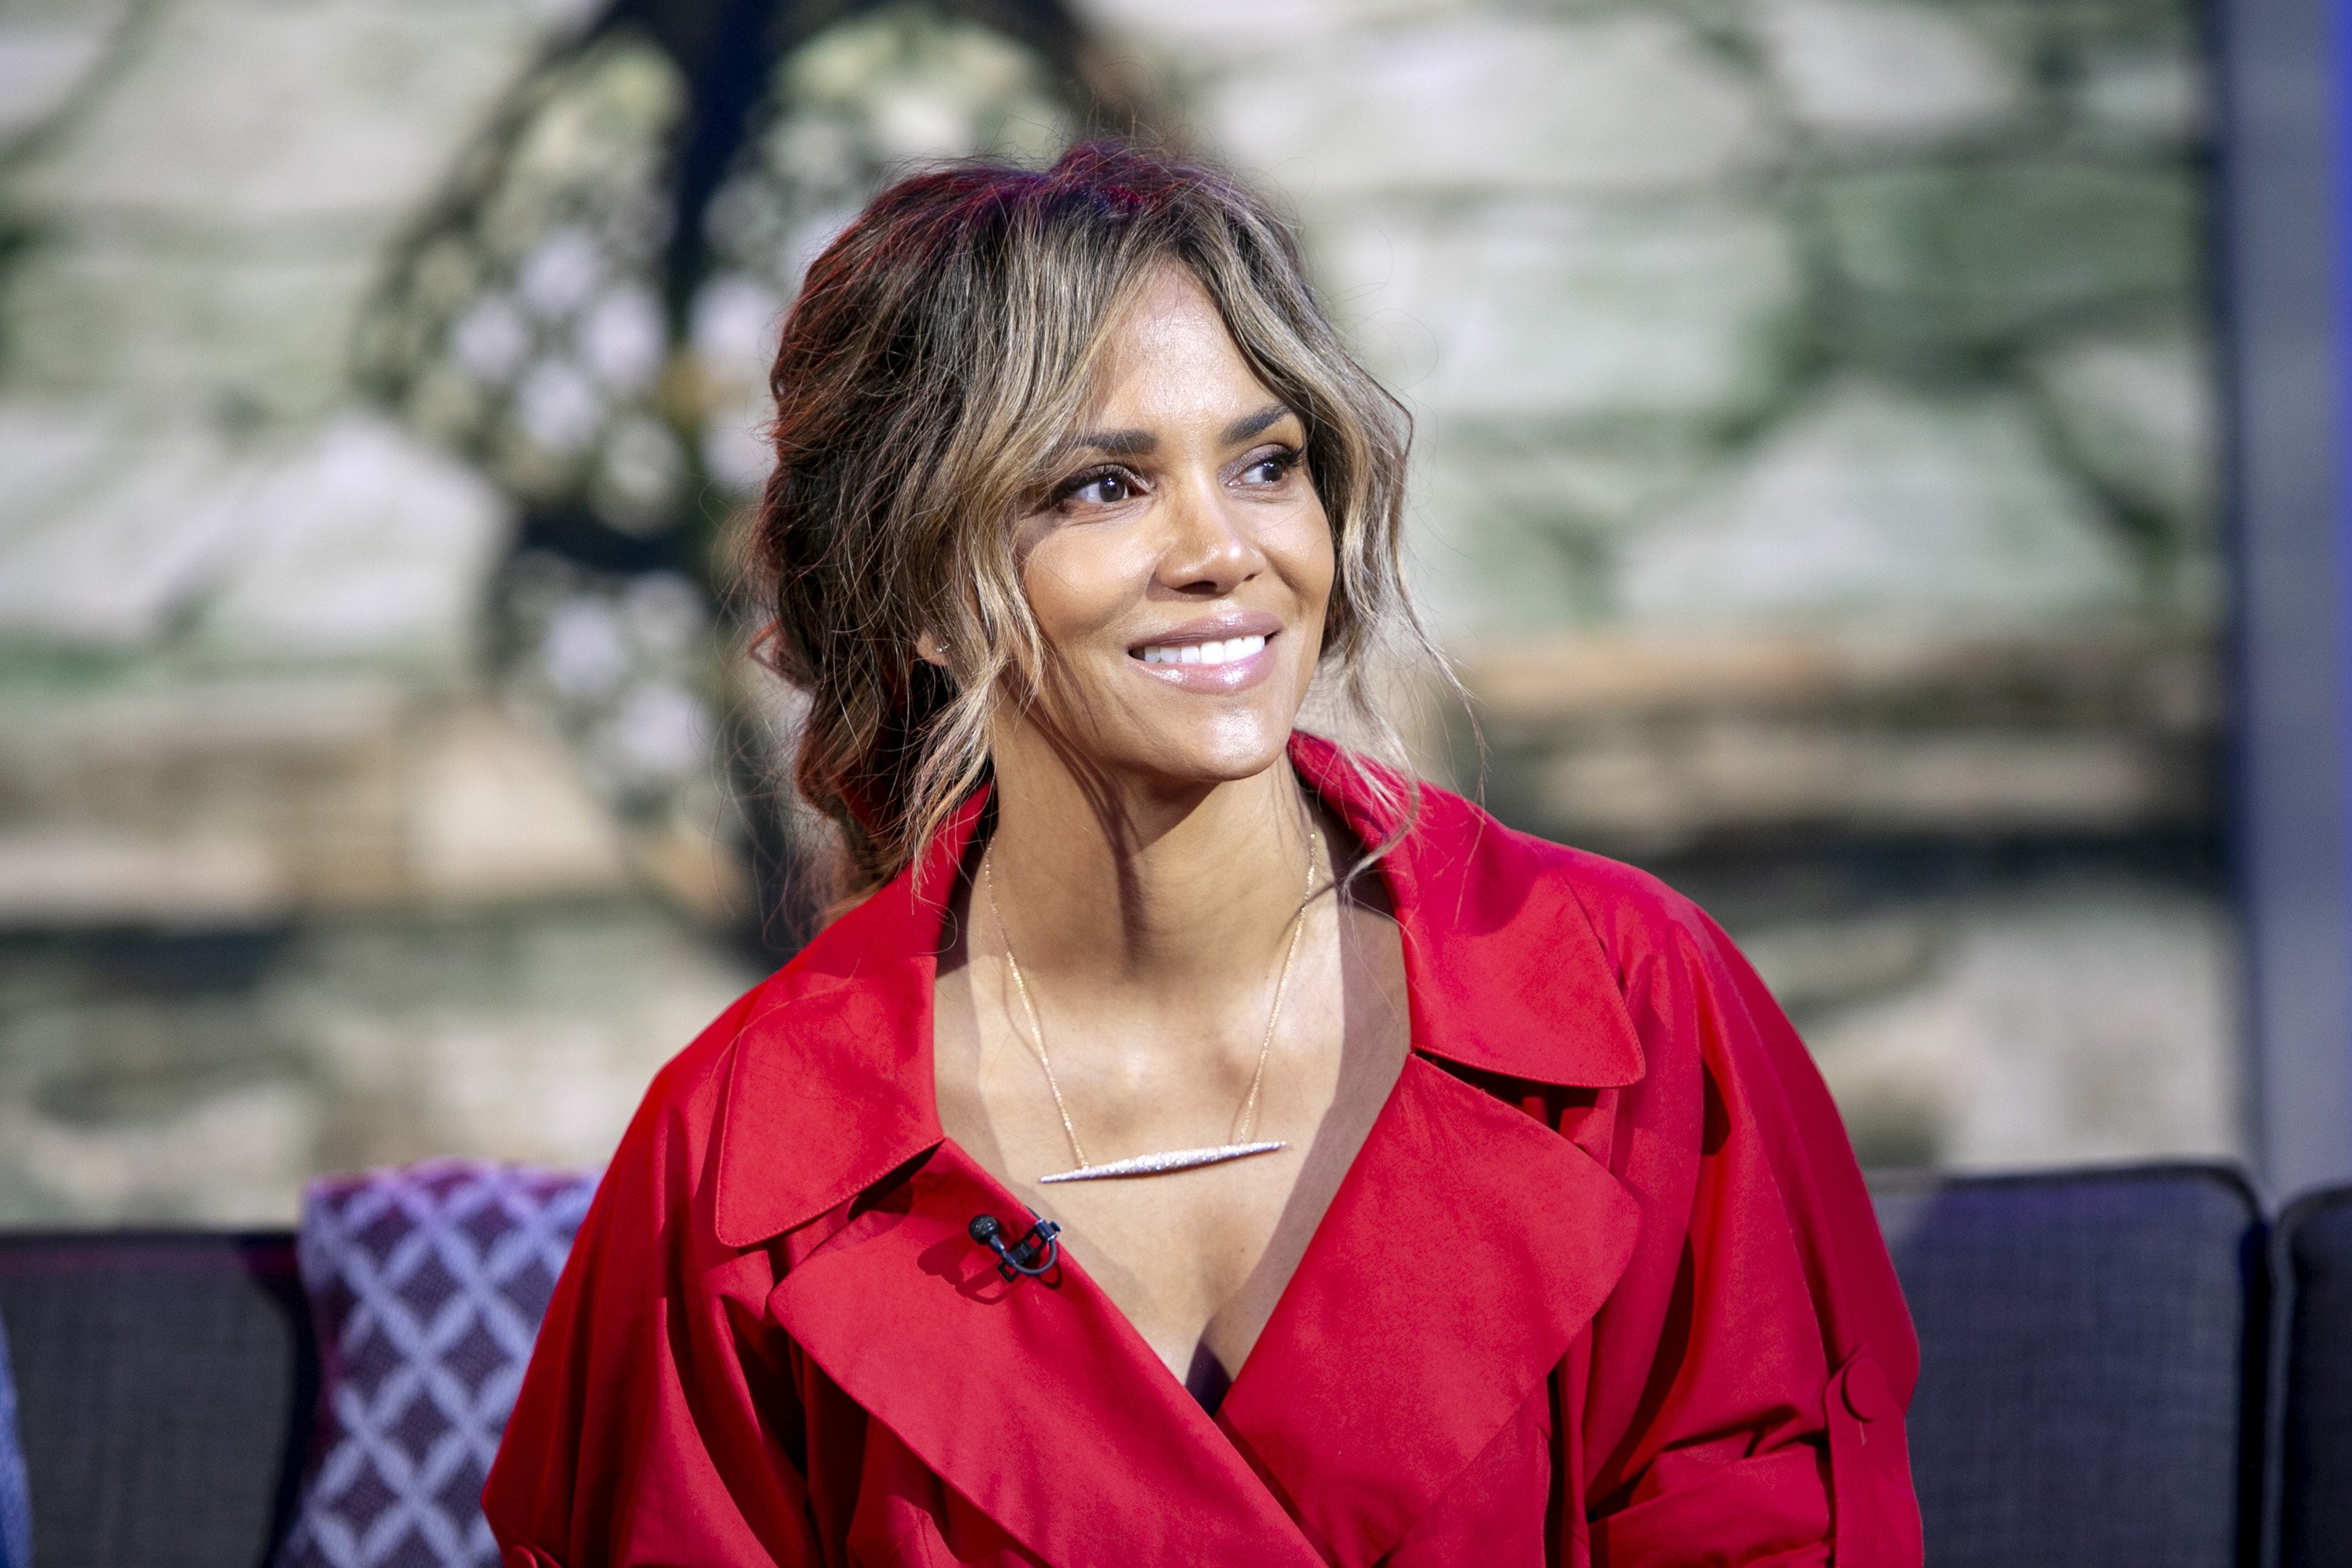 Halle Berry on NBC's Today in 2019 | Source: Getty Images